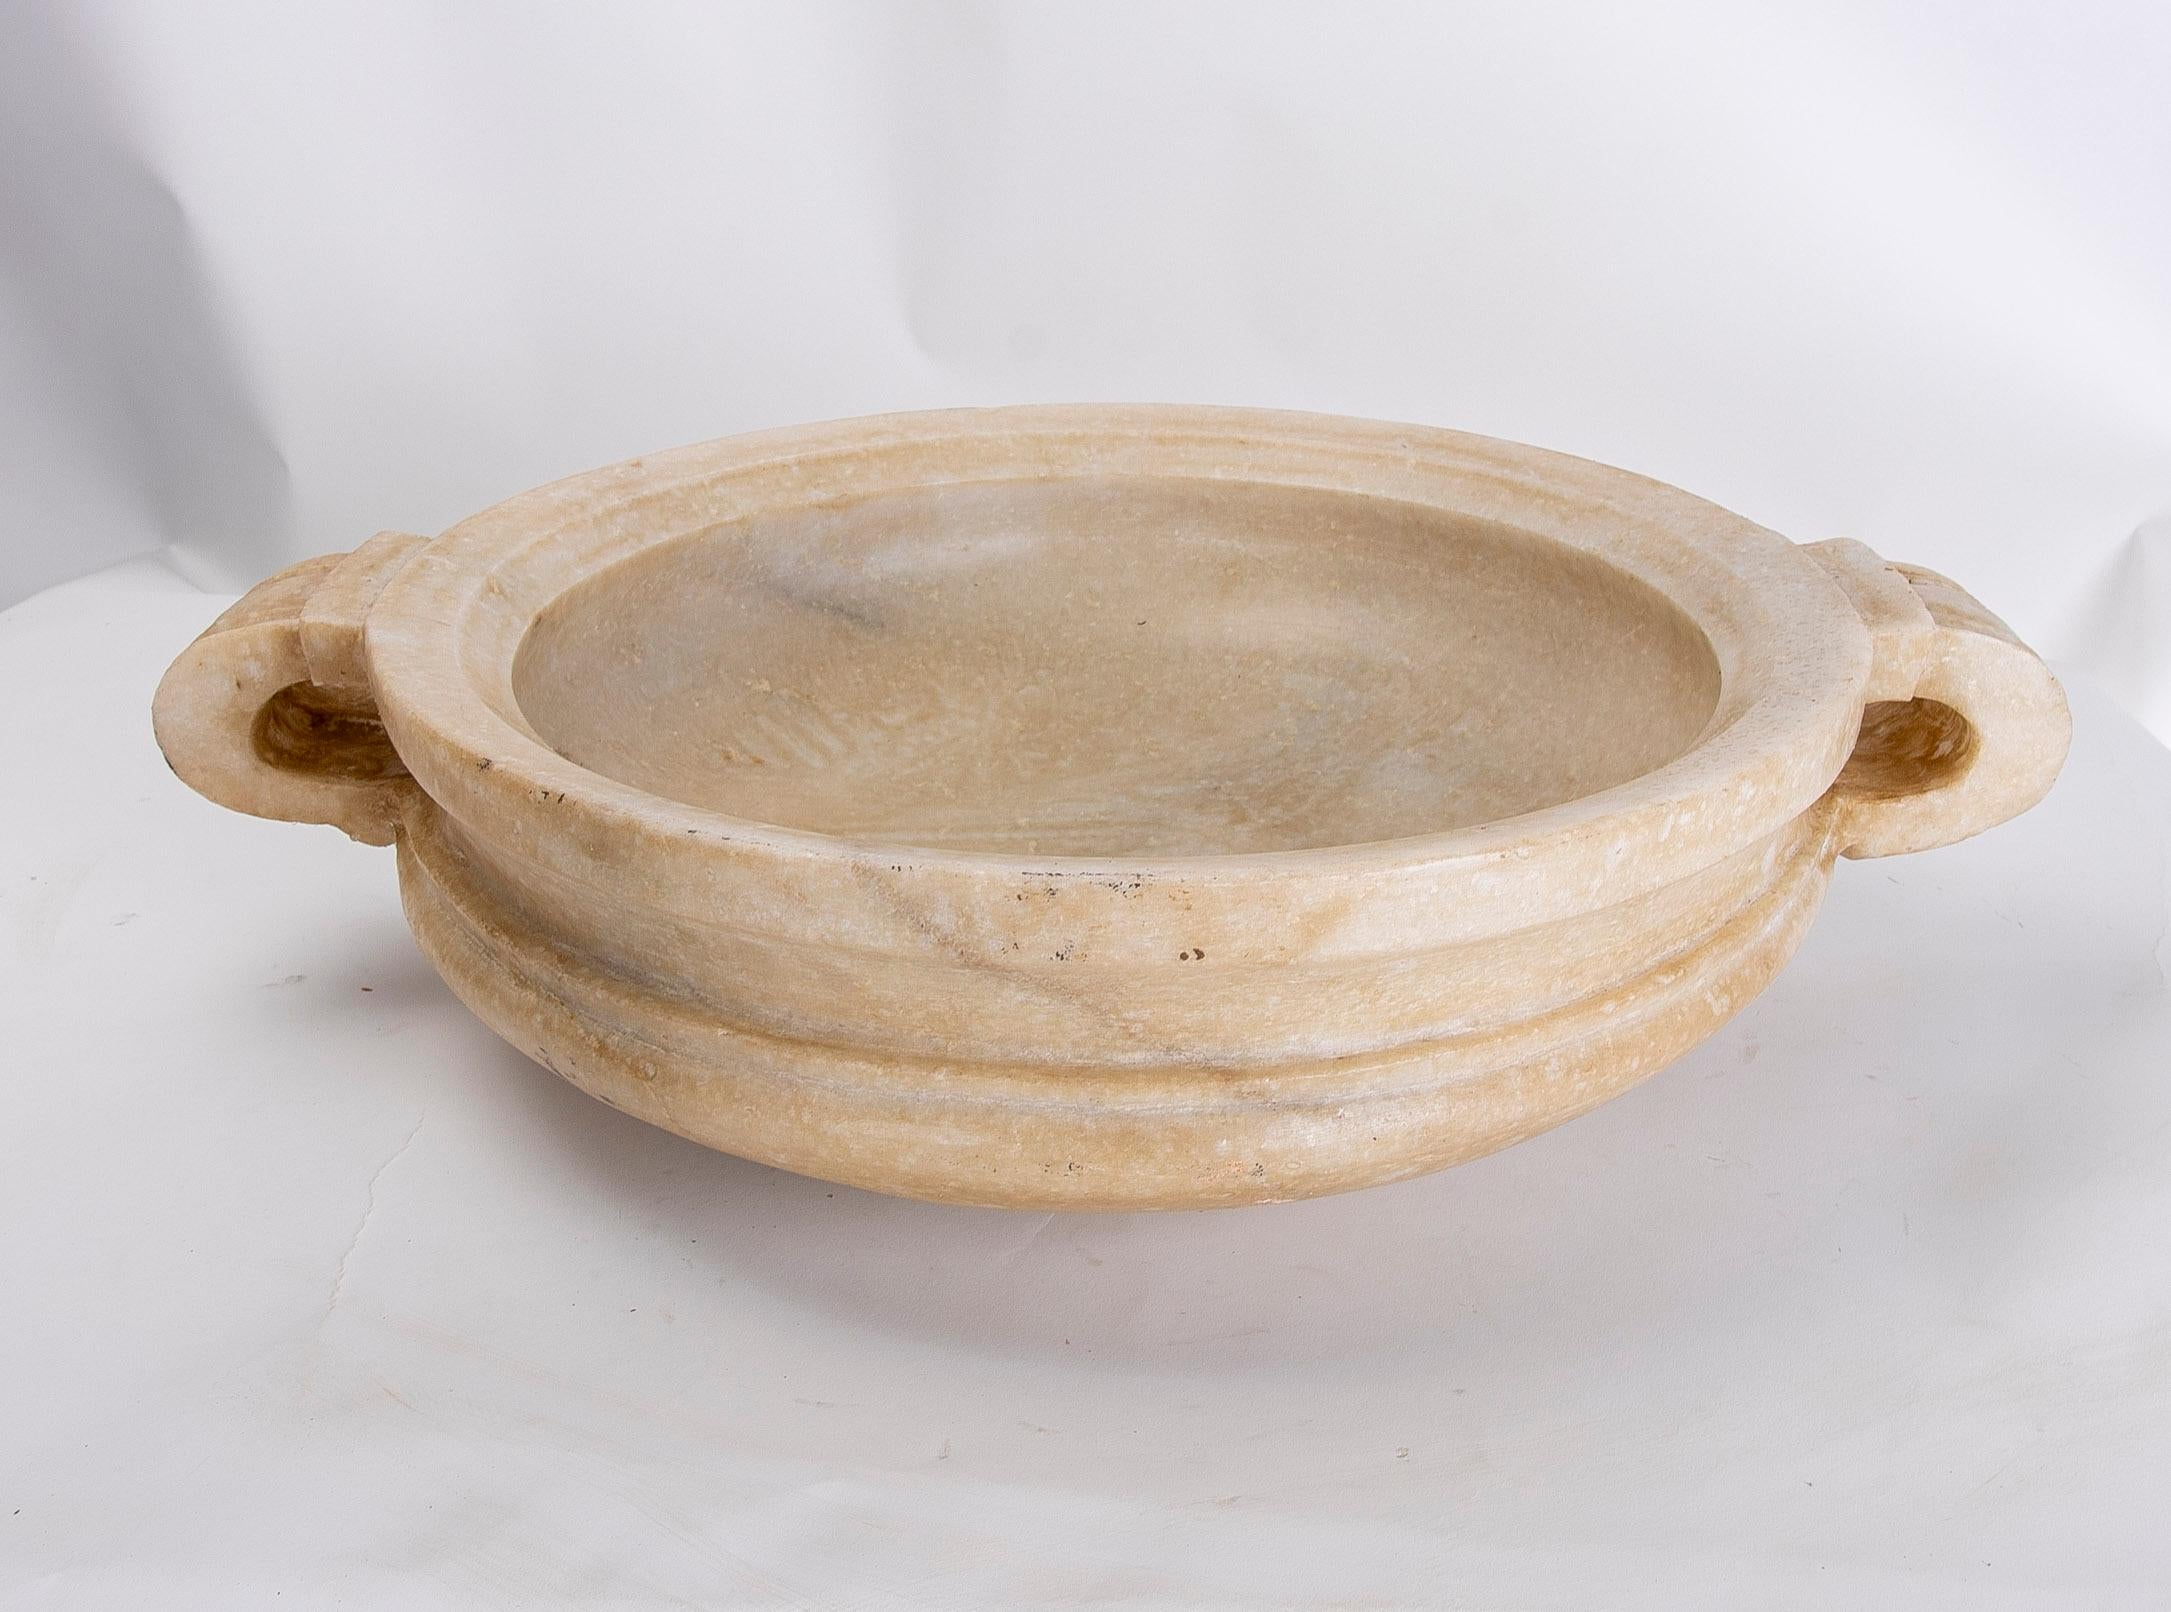 Hand-Carved White Marble Decorative Dish in the Shape of a Casserole with Handles